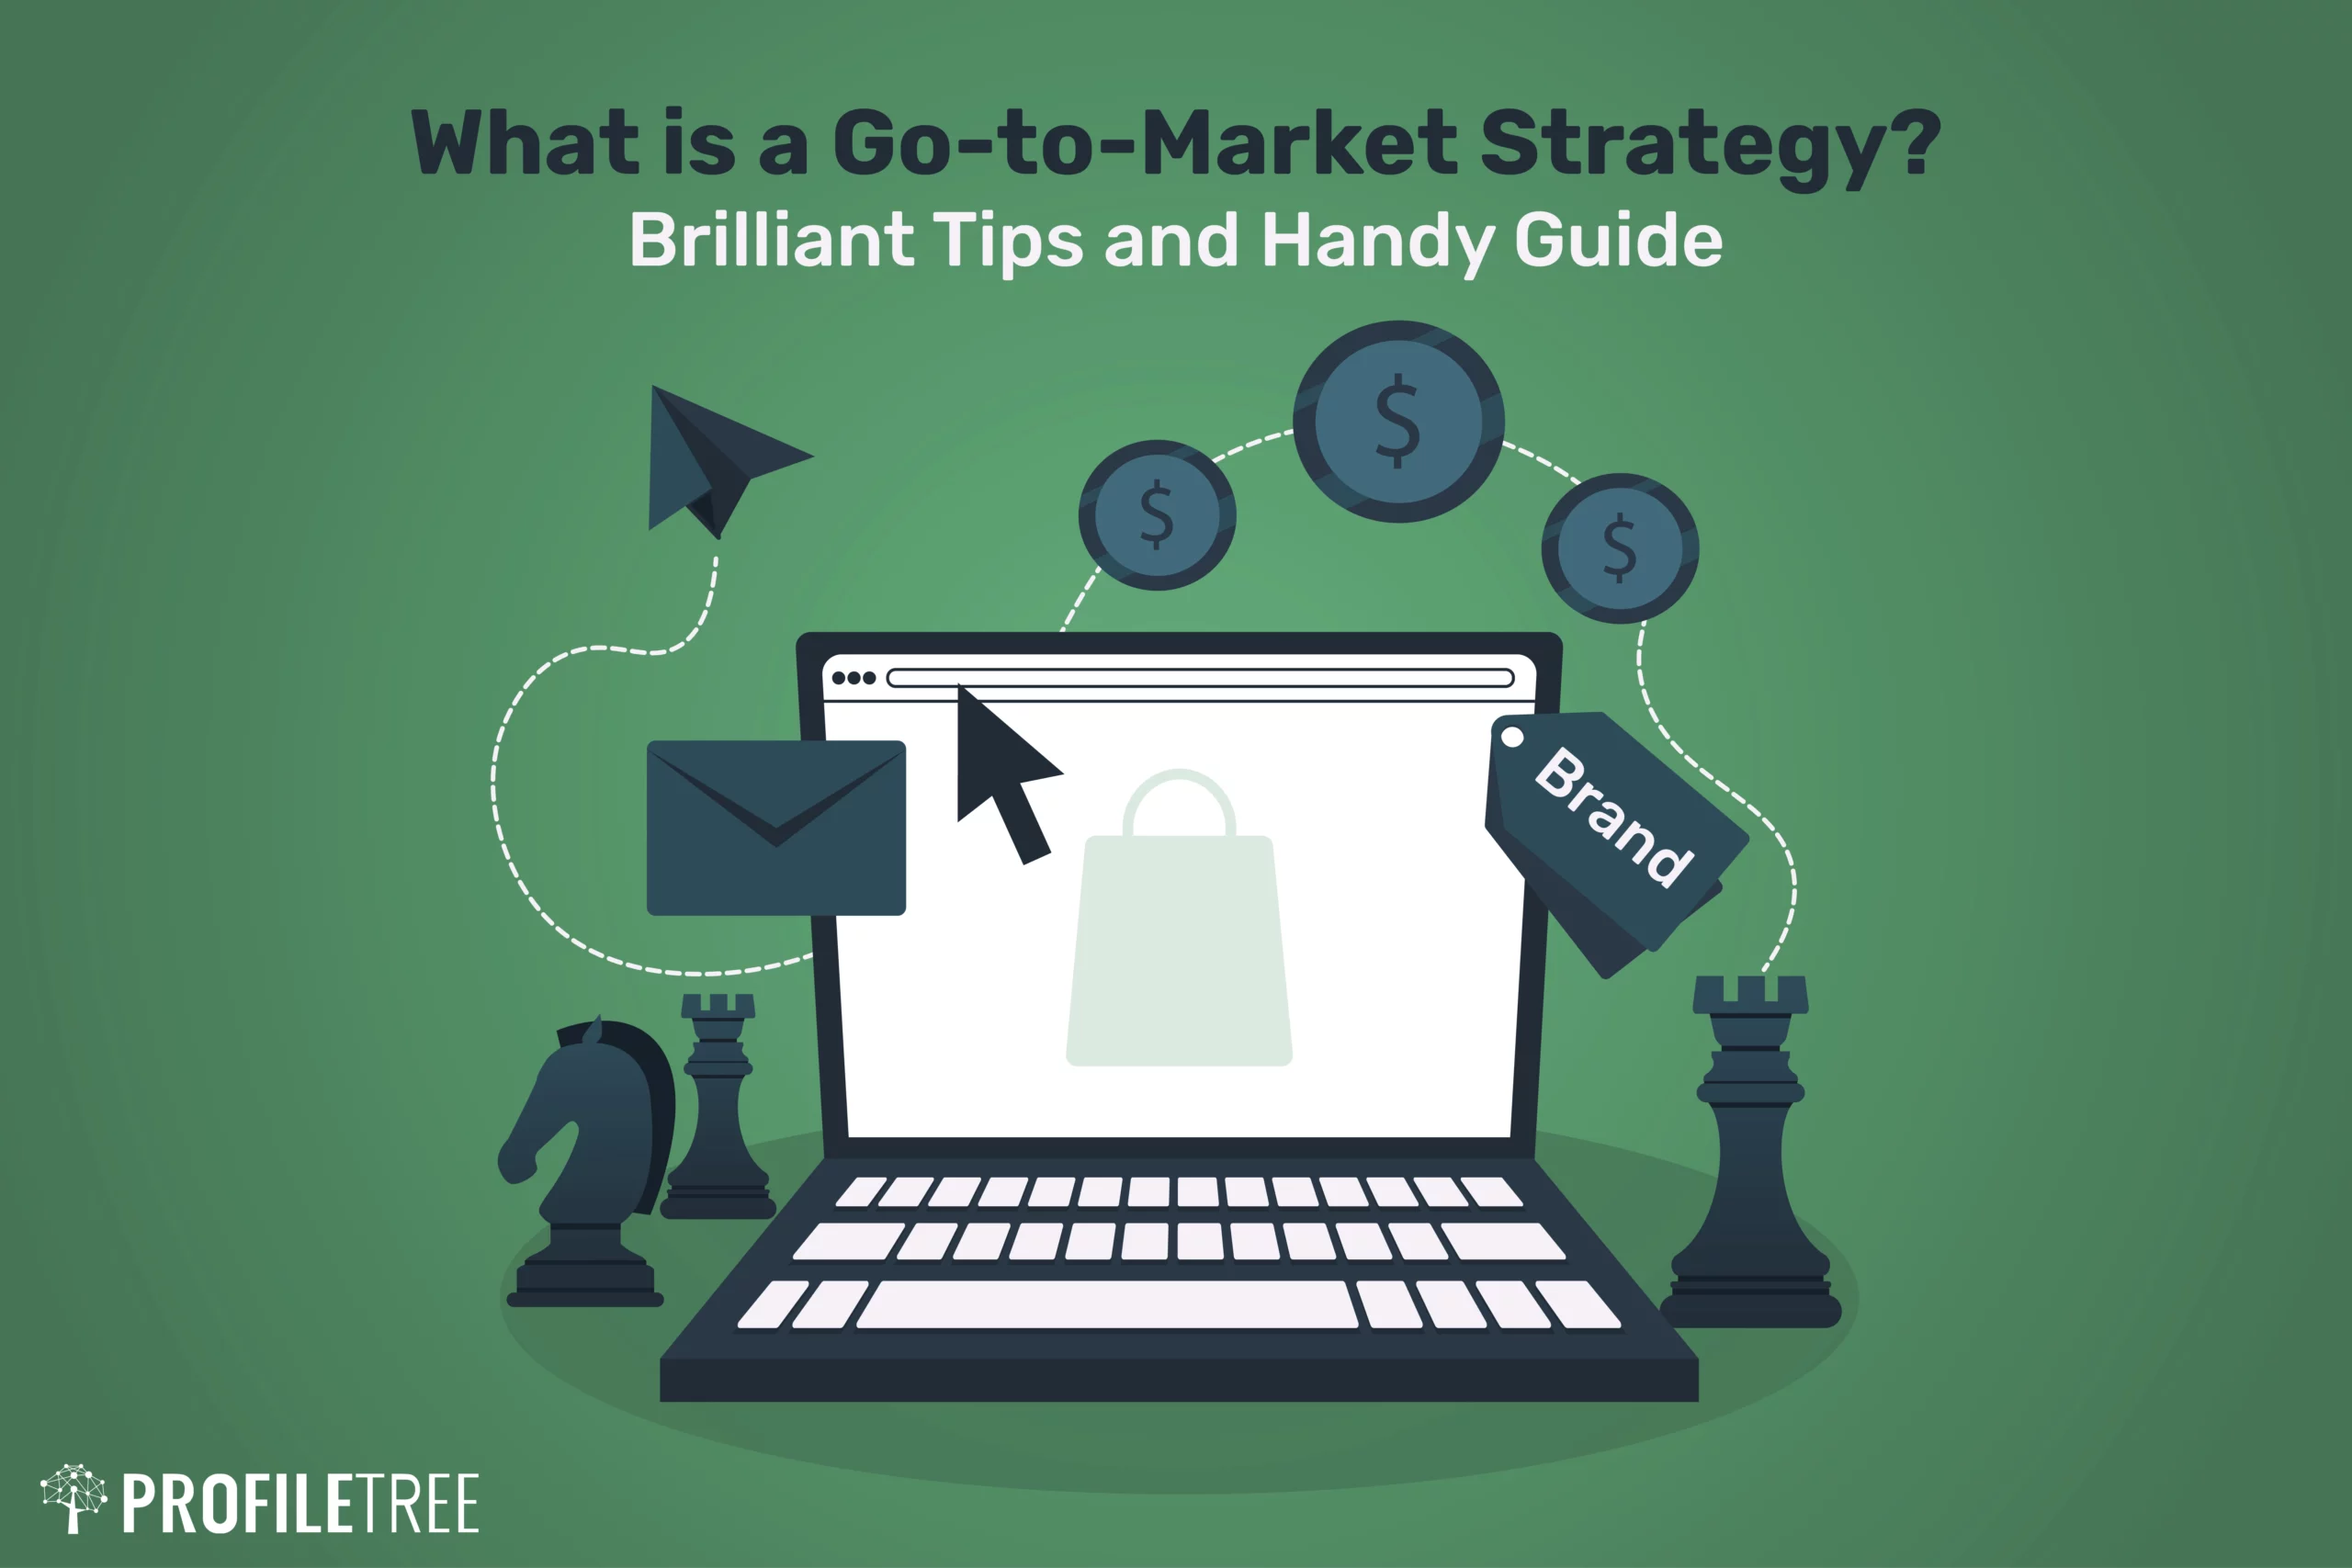 What is a Go-to-Market Strategy Brilliant Tips and Handy Guide